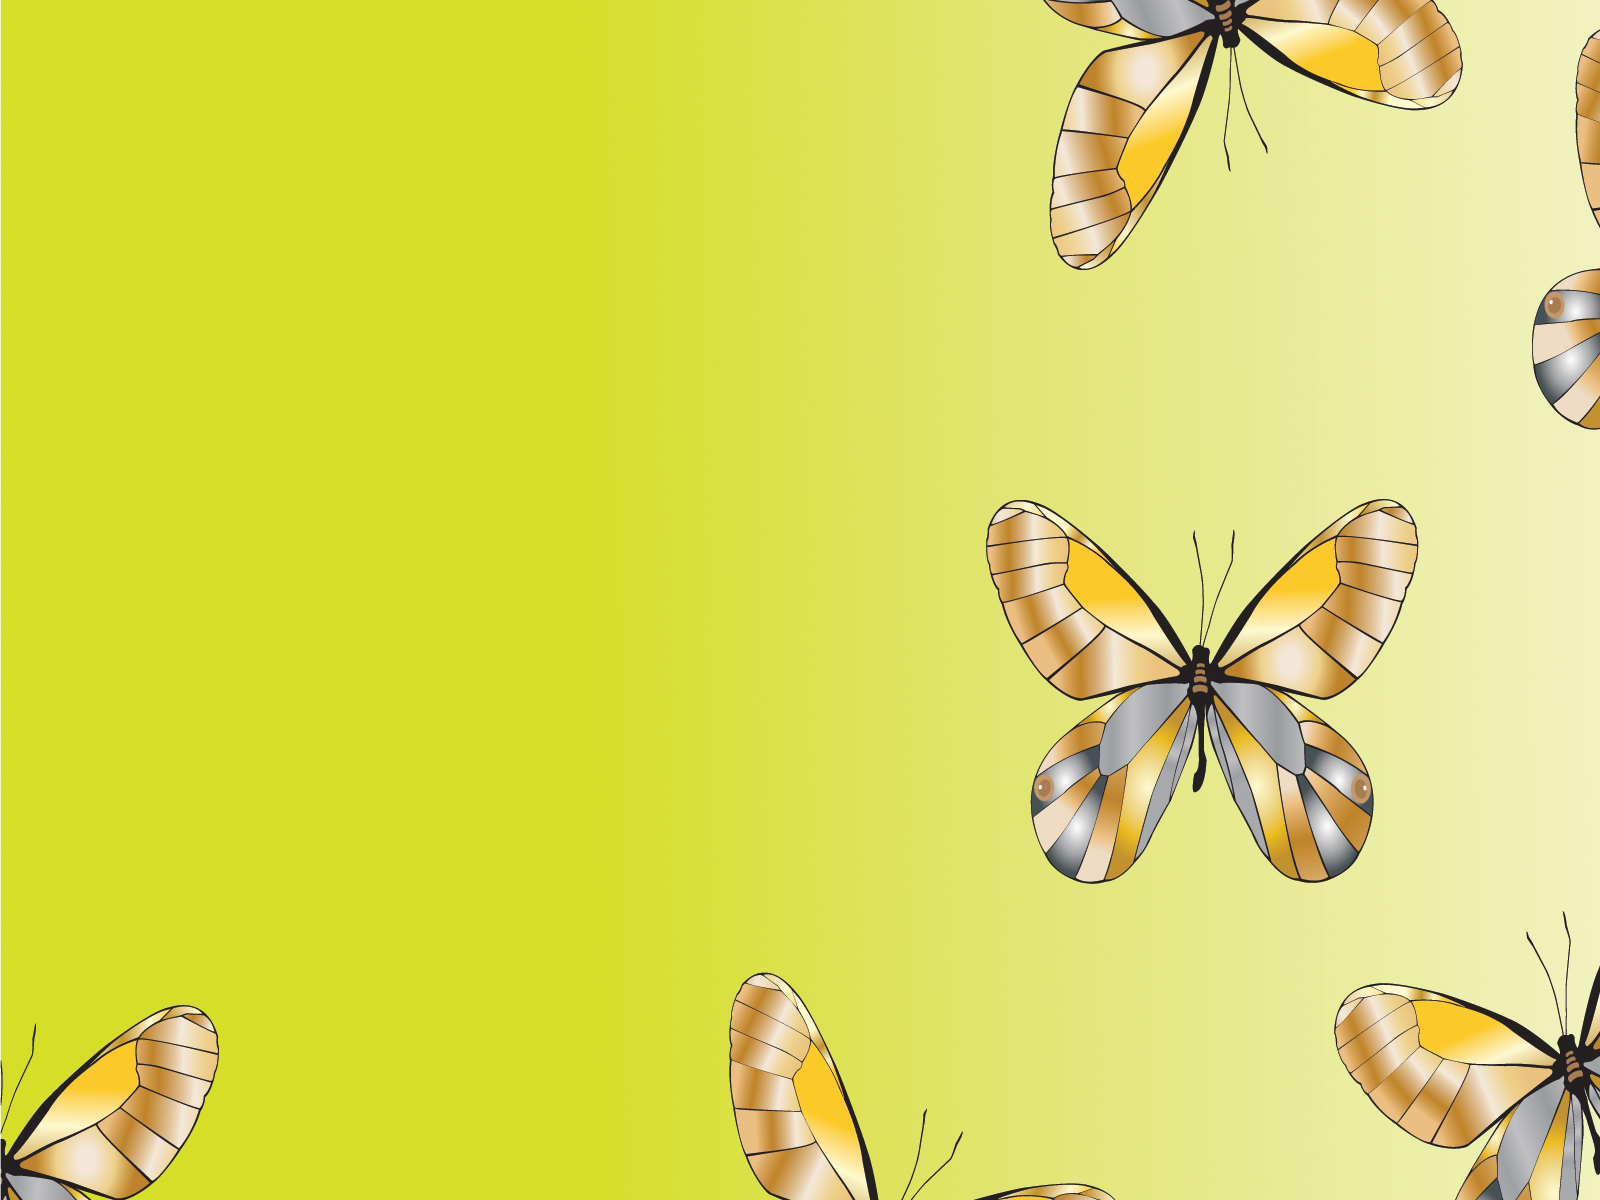 Butterflies are Flying Powerpoint Templates - Animals & Wildlife, Green -  Free PPT Backgrounds and Templates